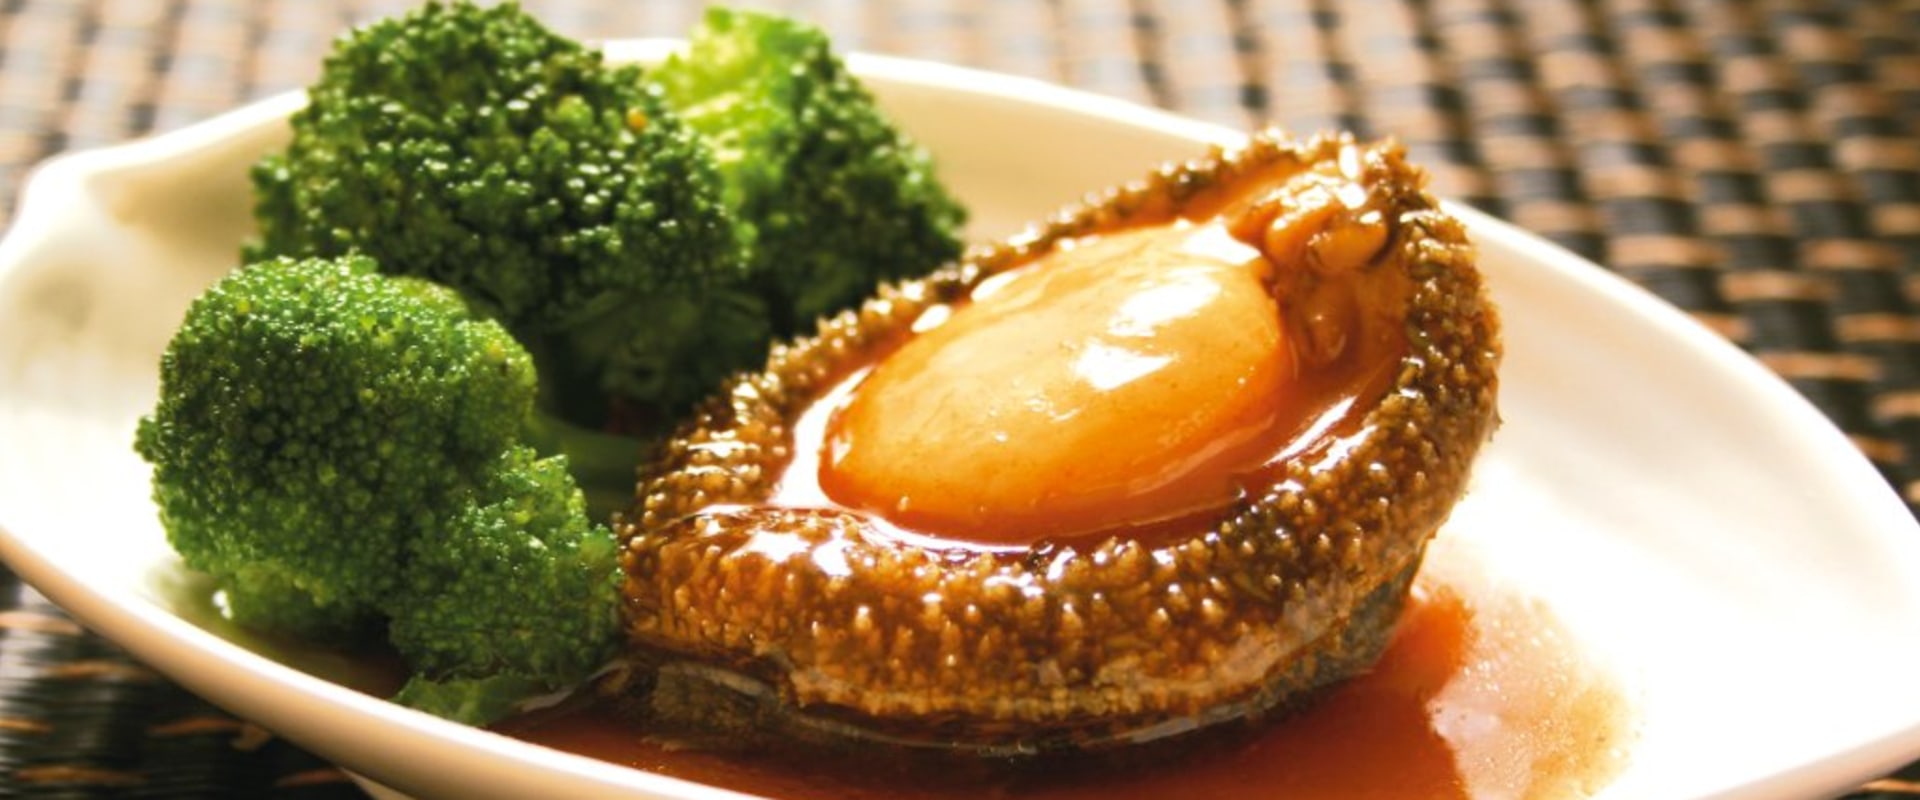 Reviews of Specific Canned Abalone Products